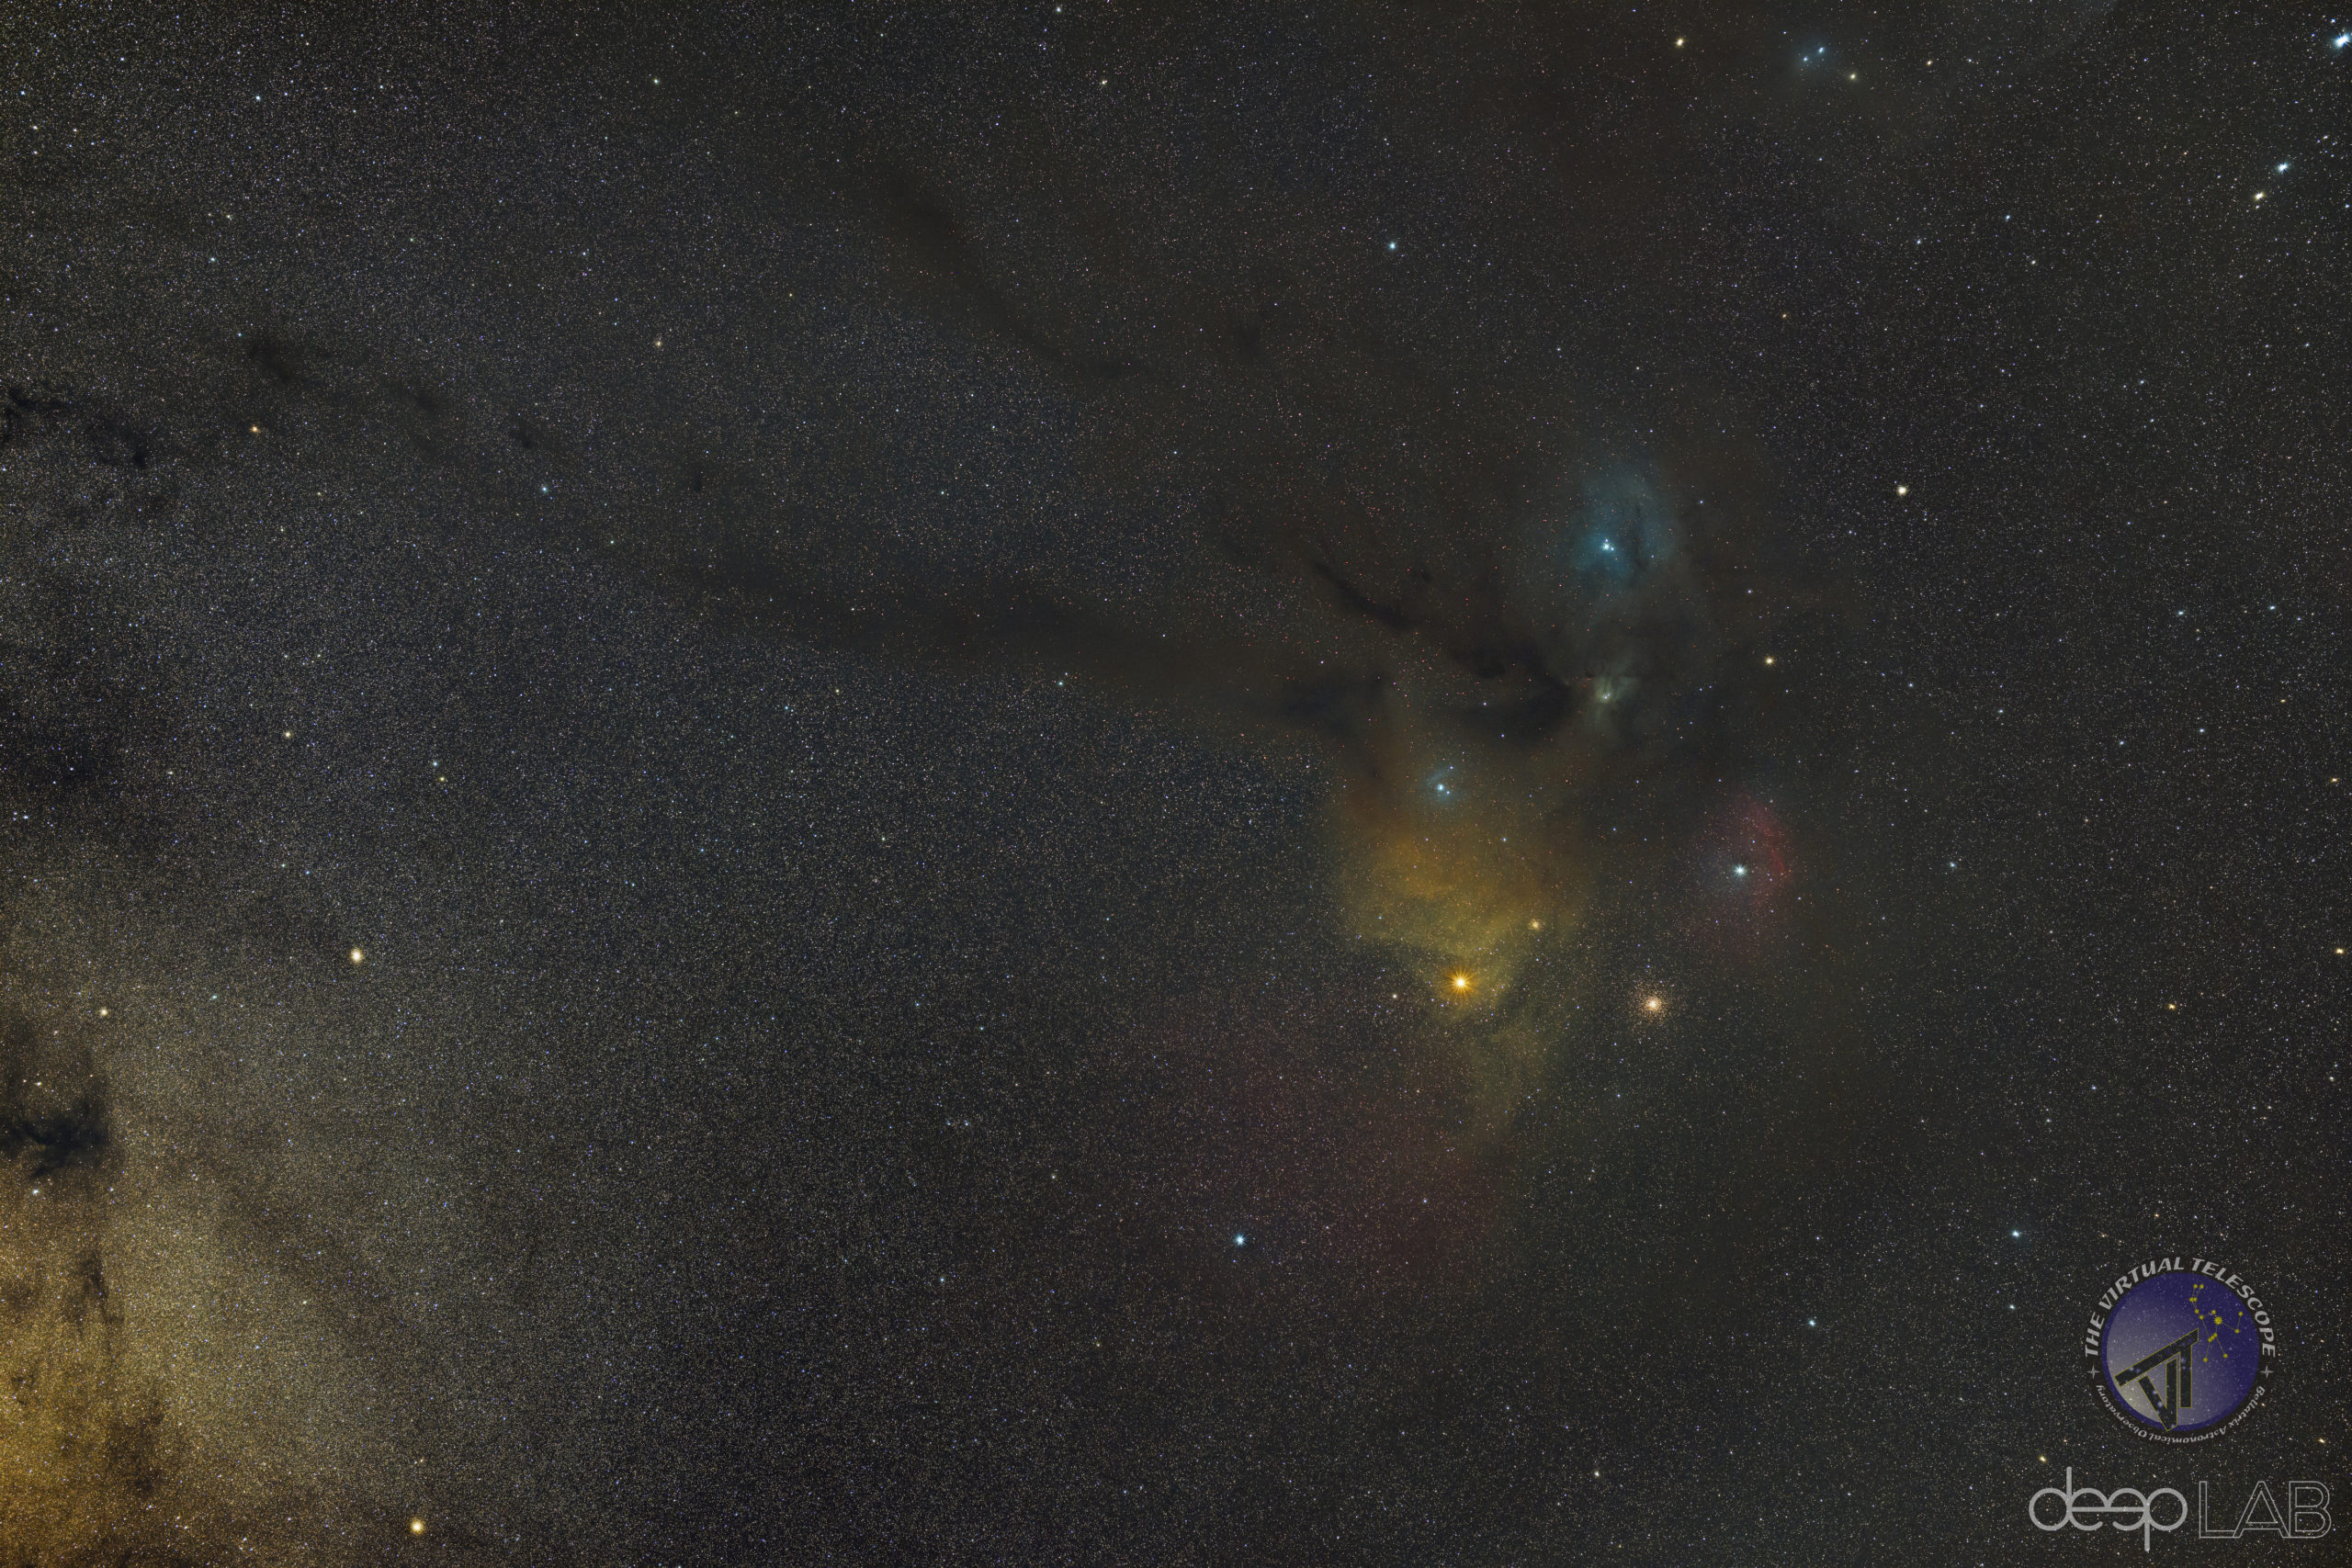 The star Antares, the Rho Ophiuchi complex and a reach region of the Milky Way.